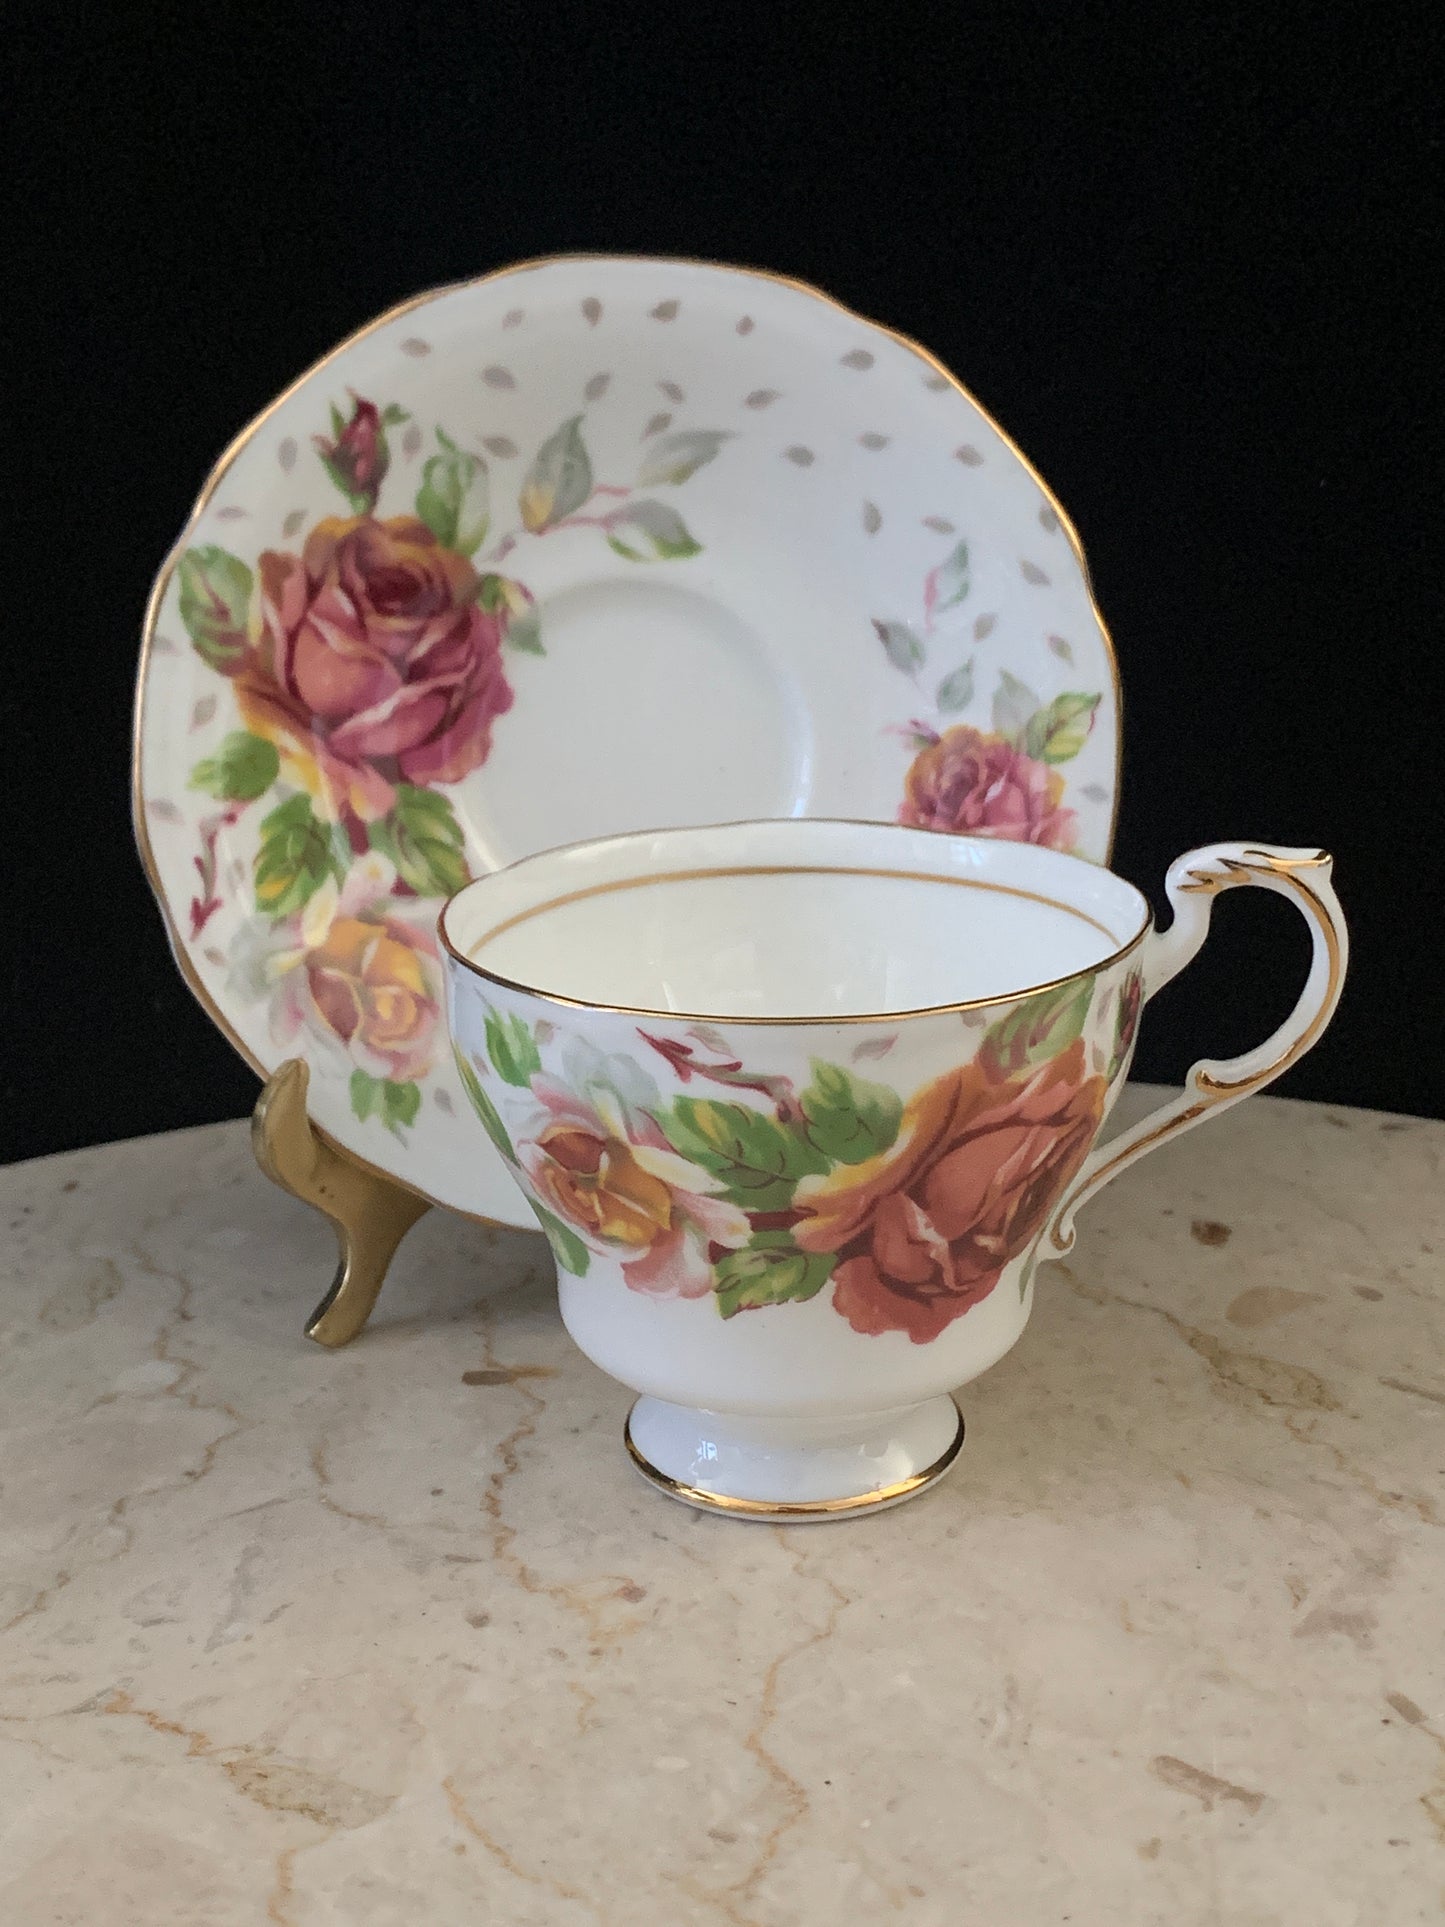 Paragon Double Warrant Tea Cup with Large Peach Roses